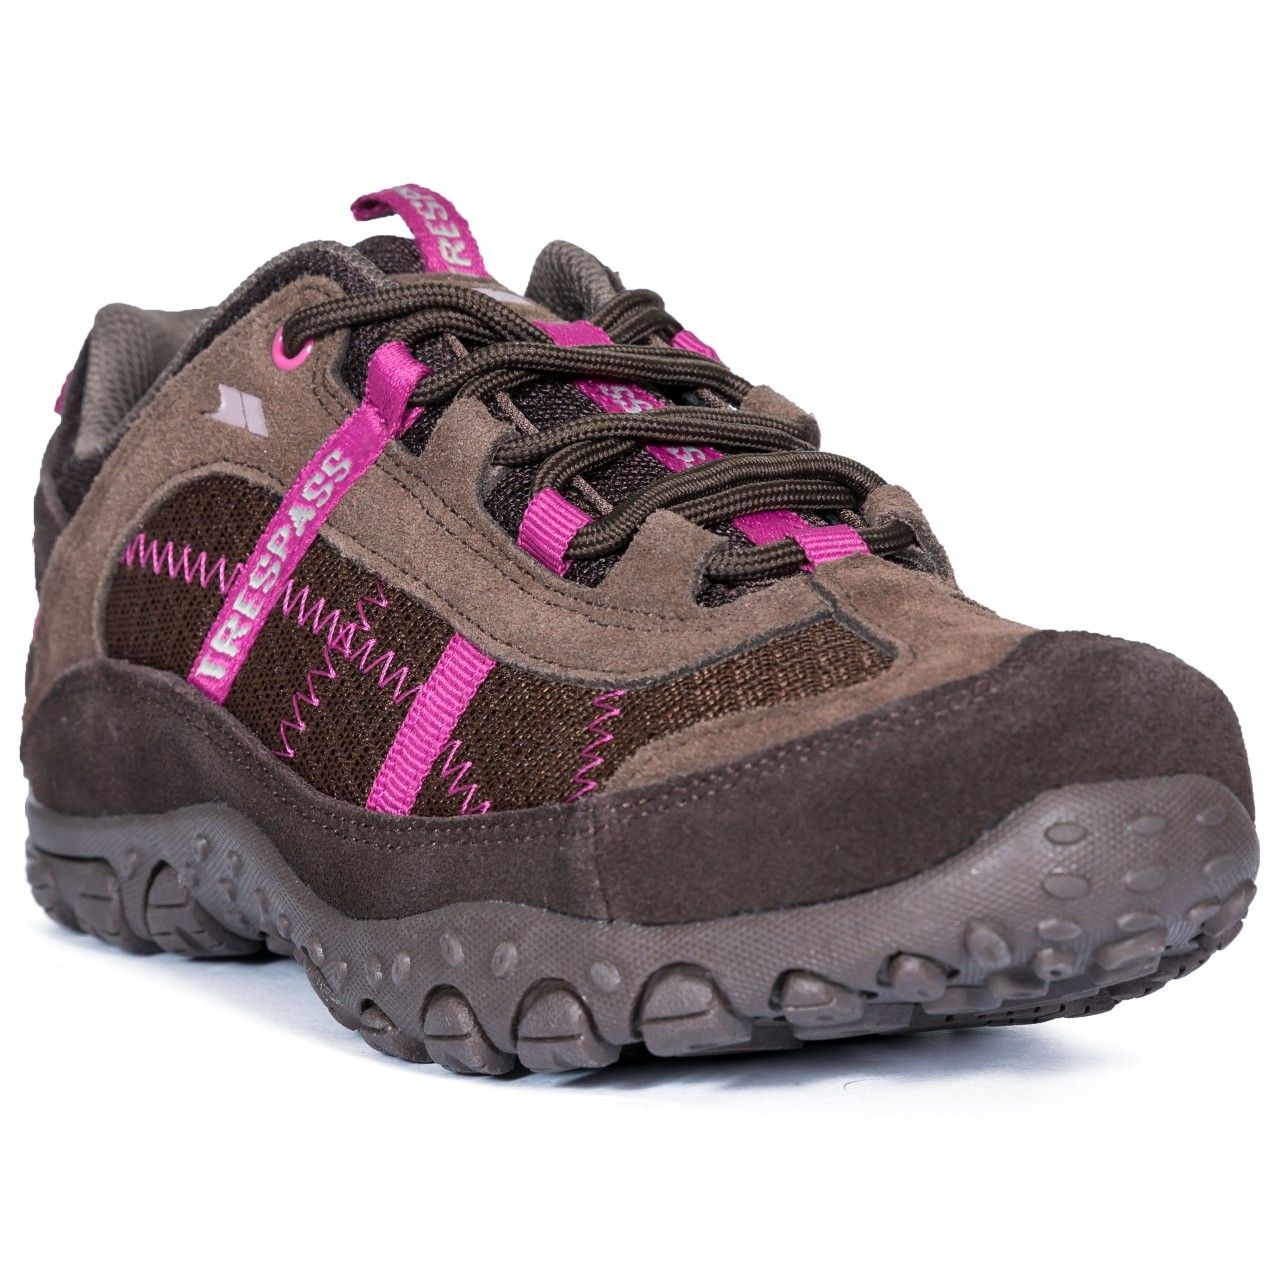 Ladies lightweight walking shoes. Breathable build. Easy-flow lacing system. Arch stabilising steel shank. Cushioned and contoured footbed. Upper: 50% Suede/50% Mesh, Lining: 100% Mesh, Insole: 100% EVA, Outsole: 100% TPR.